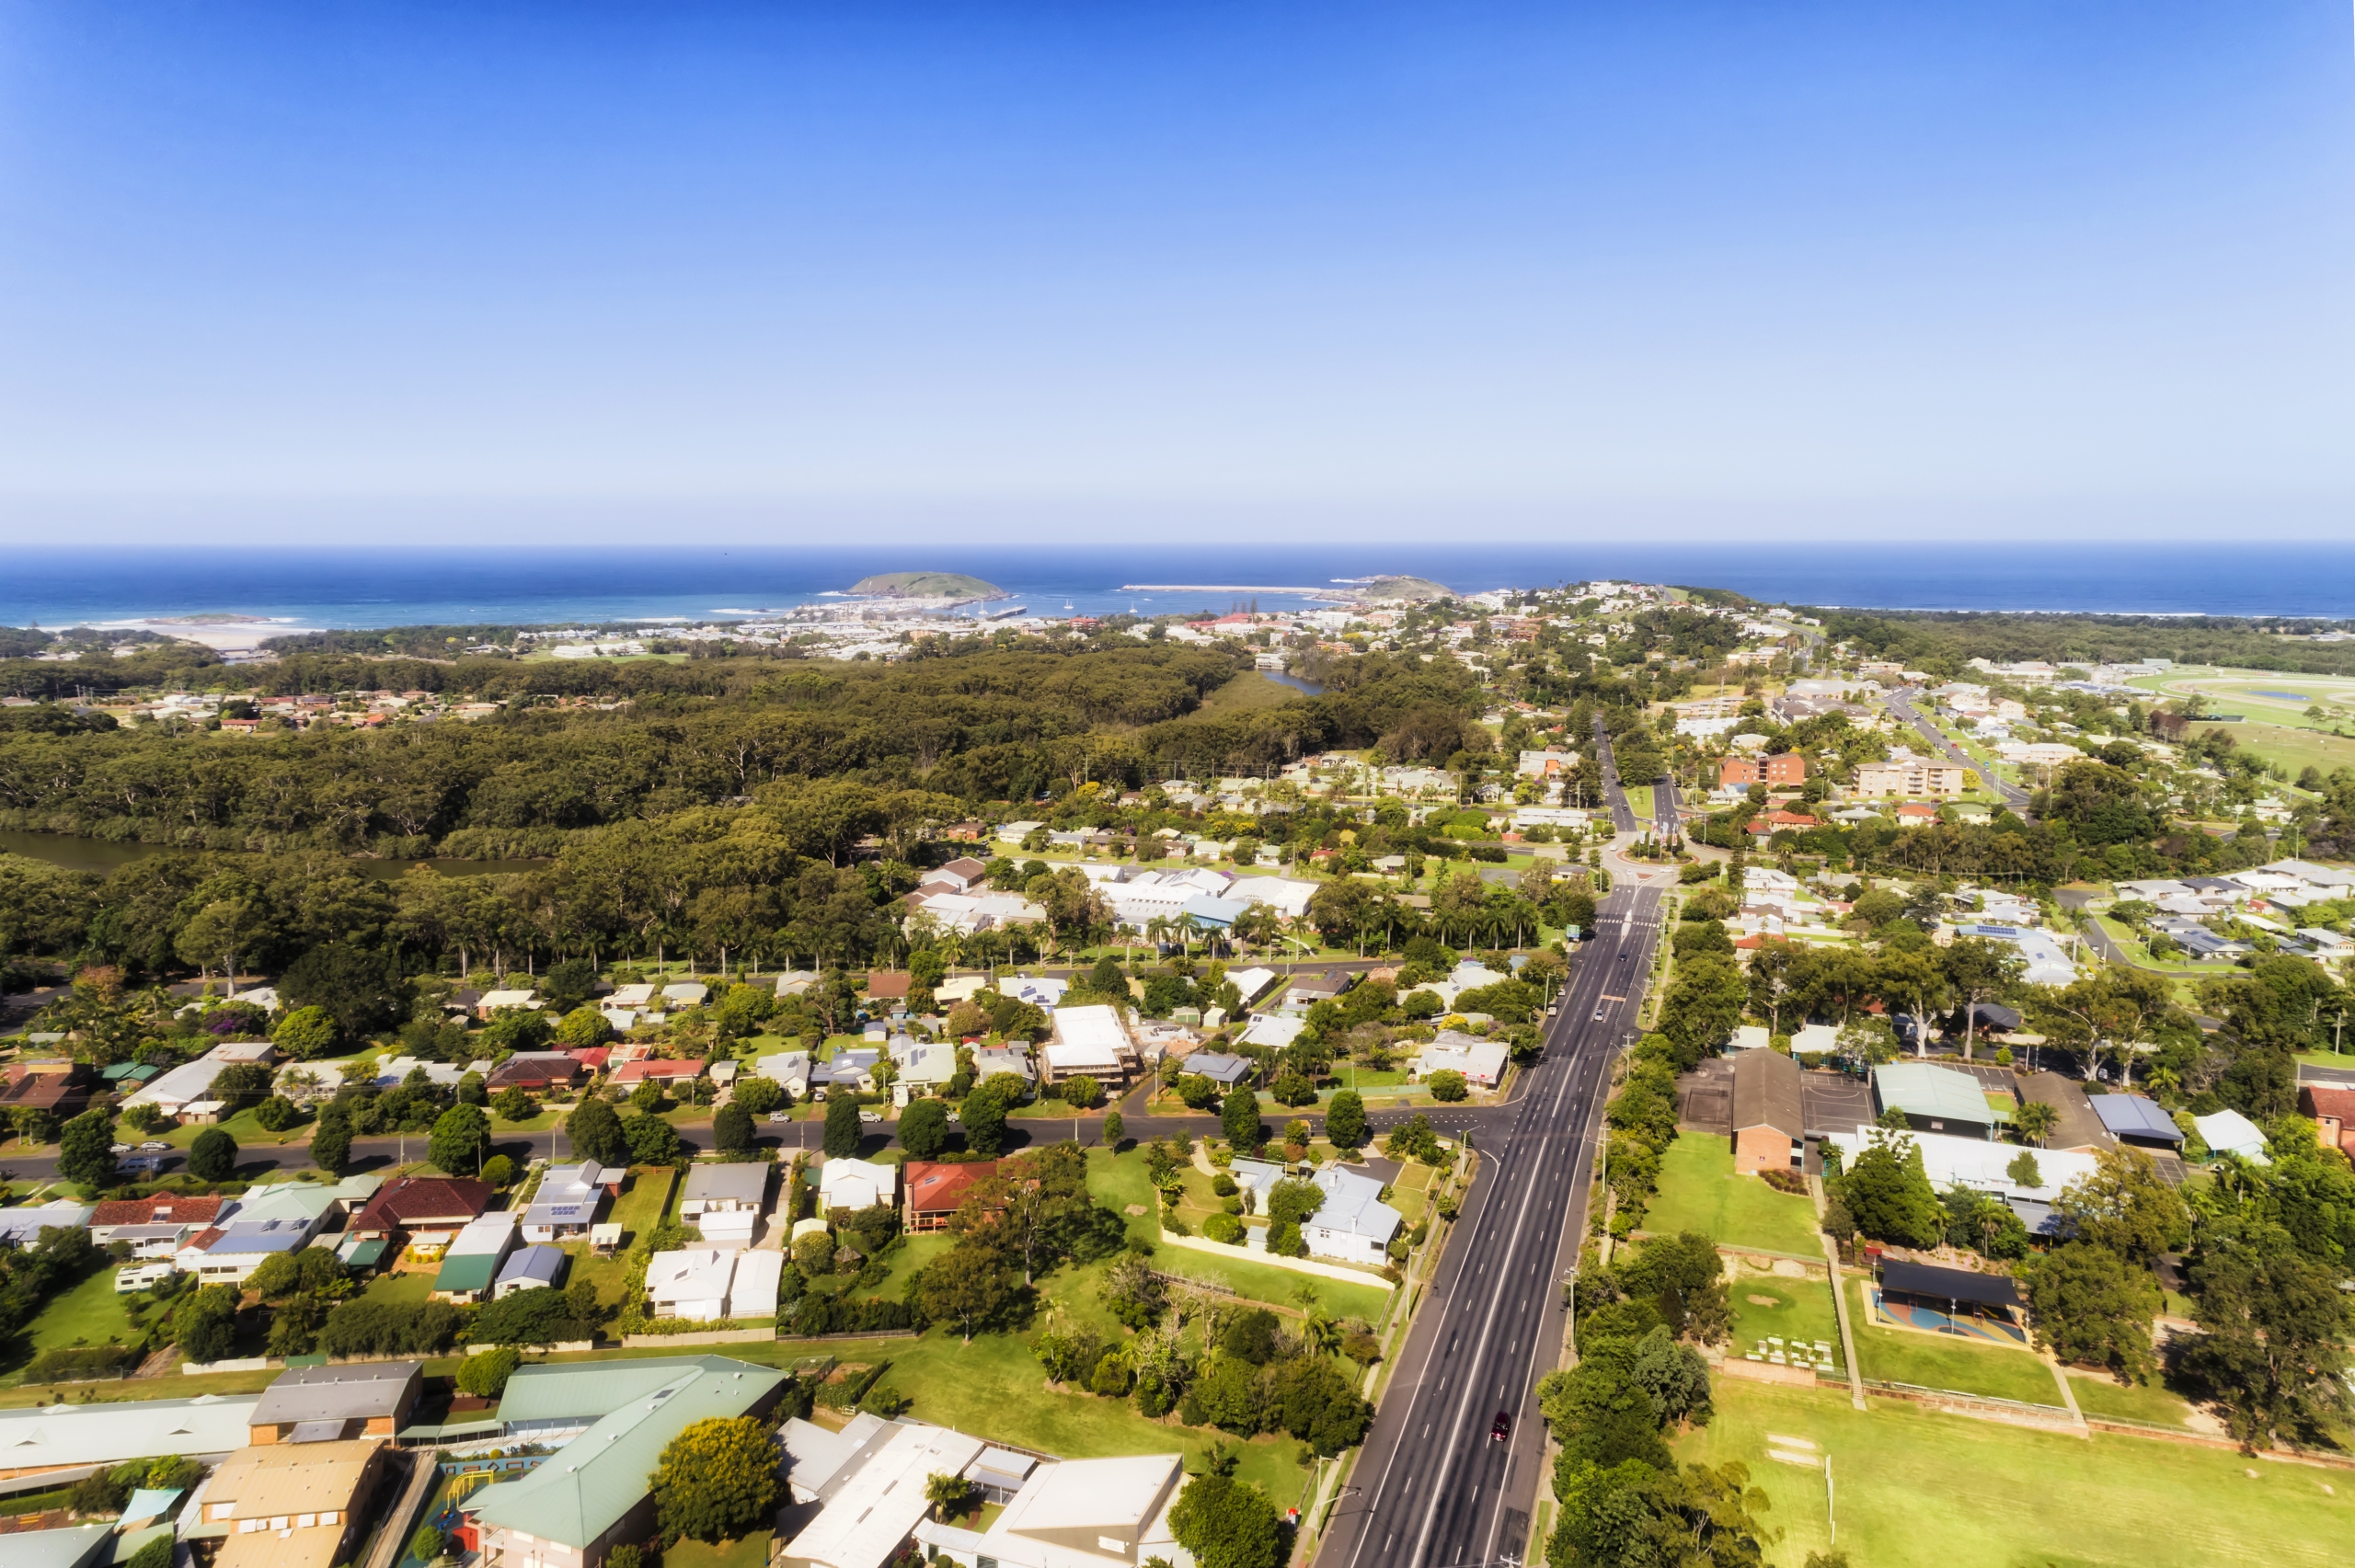 Top 3 Regional Suburbs When Buying a Home for the First Time